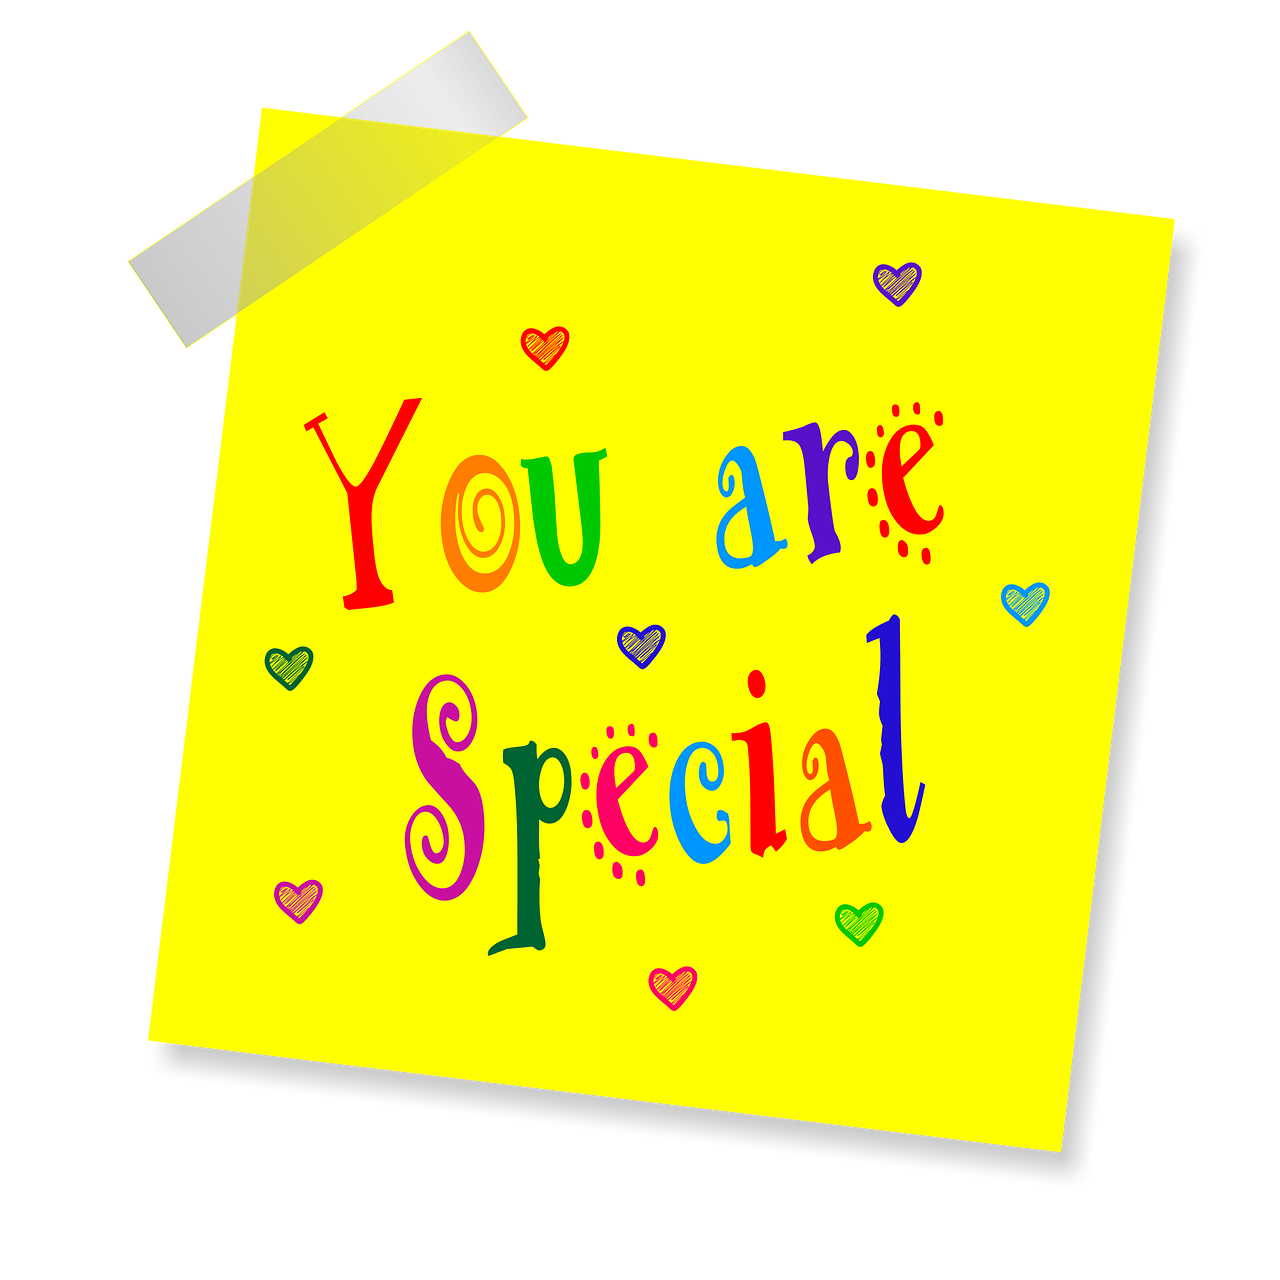 you are special yellow sticker note free photo